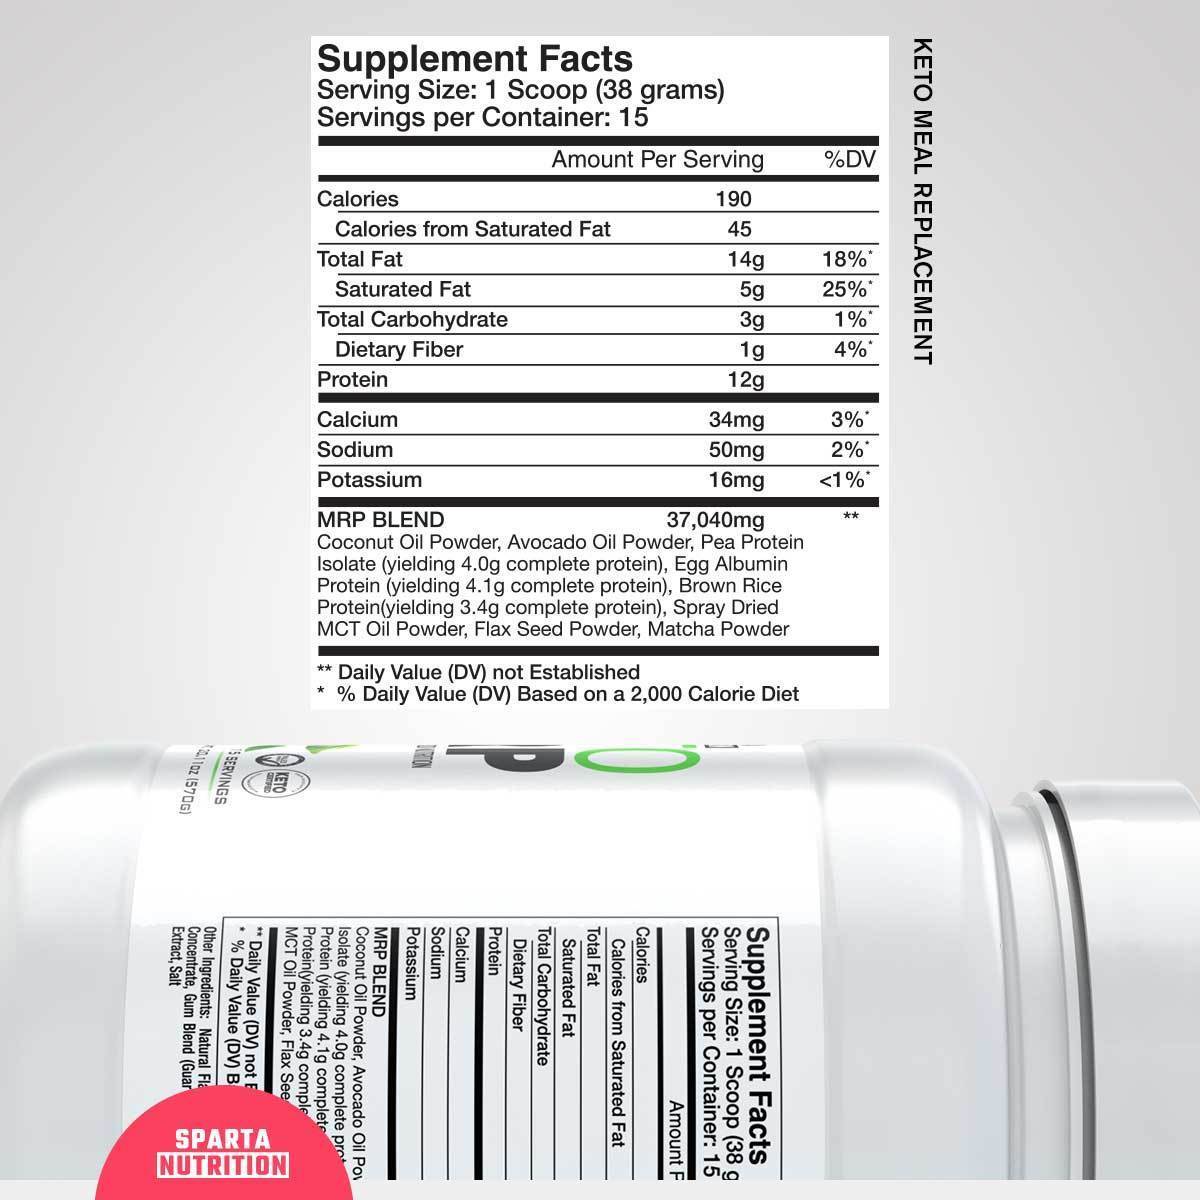 Keto MRP Supplement Facts